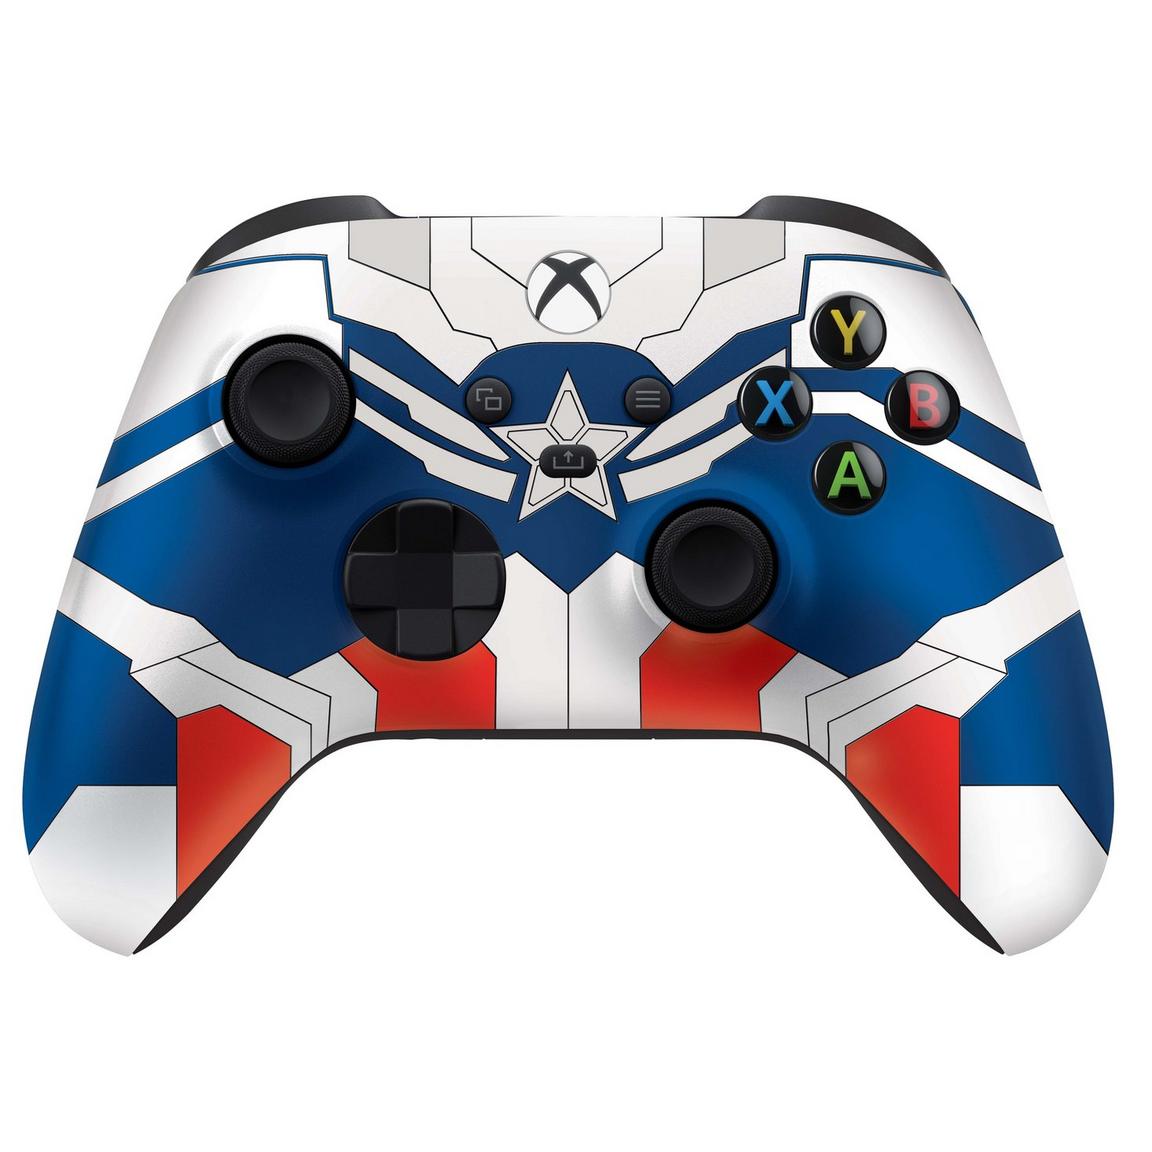 Razer Captain America Xbox Controller and Charging Stand